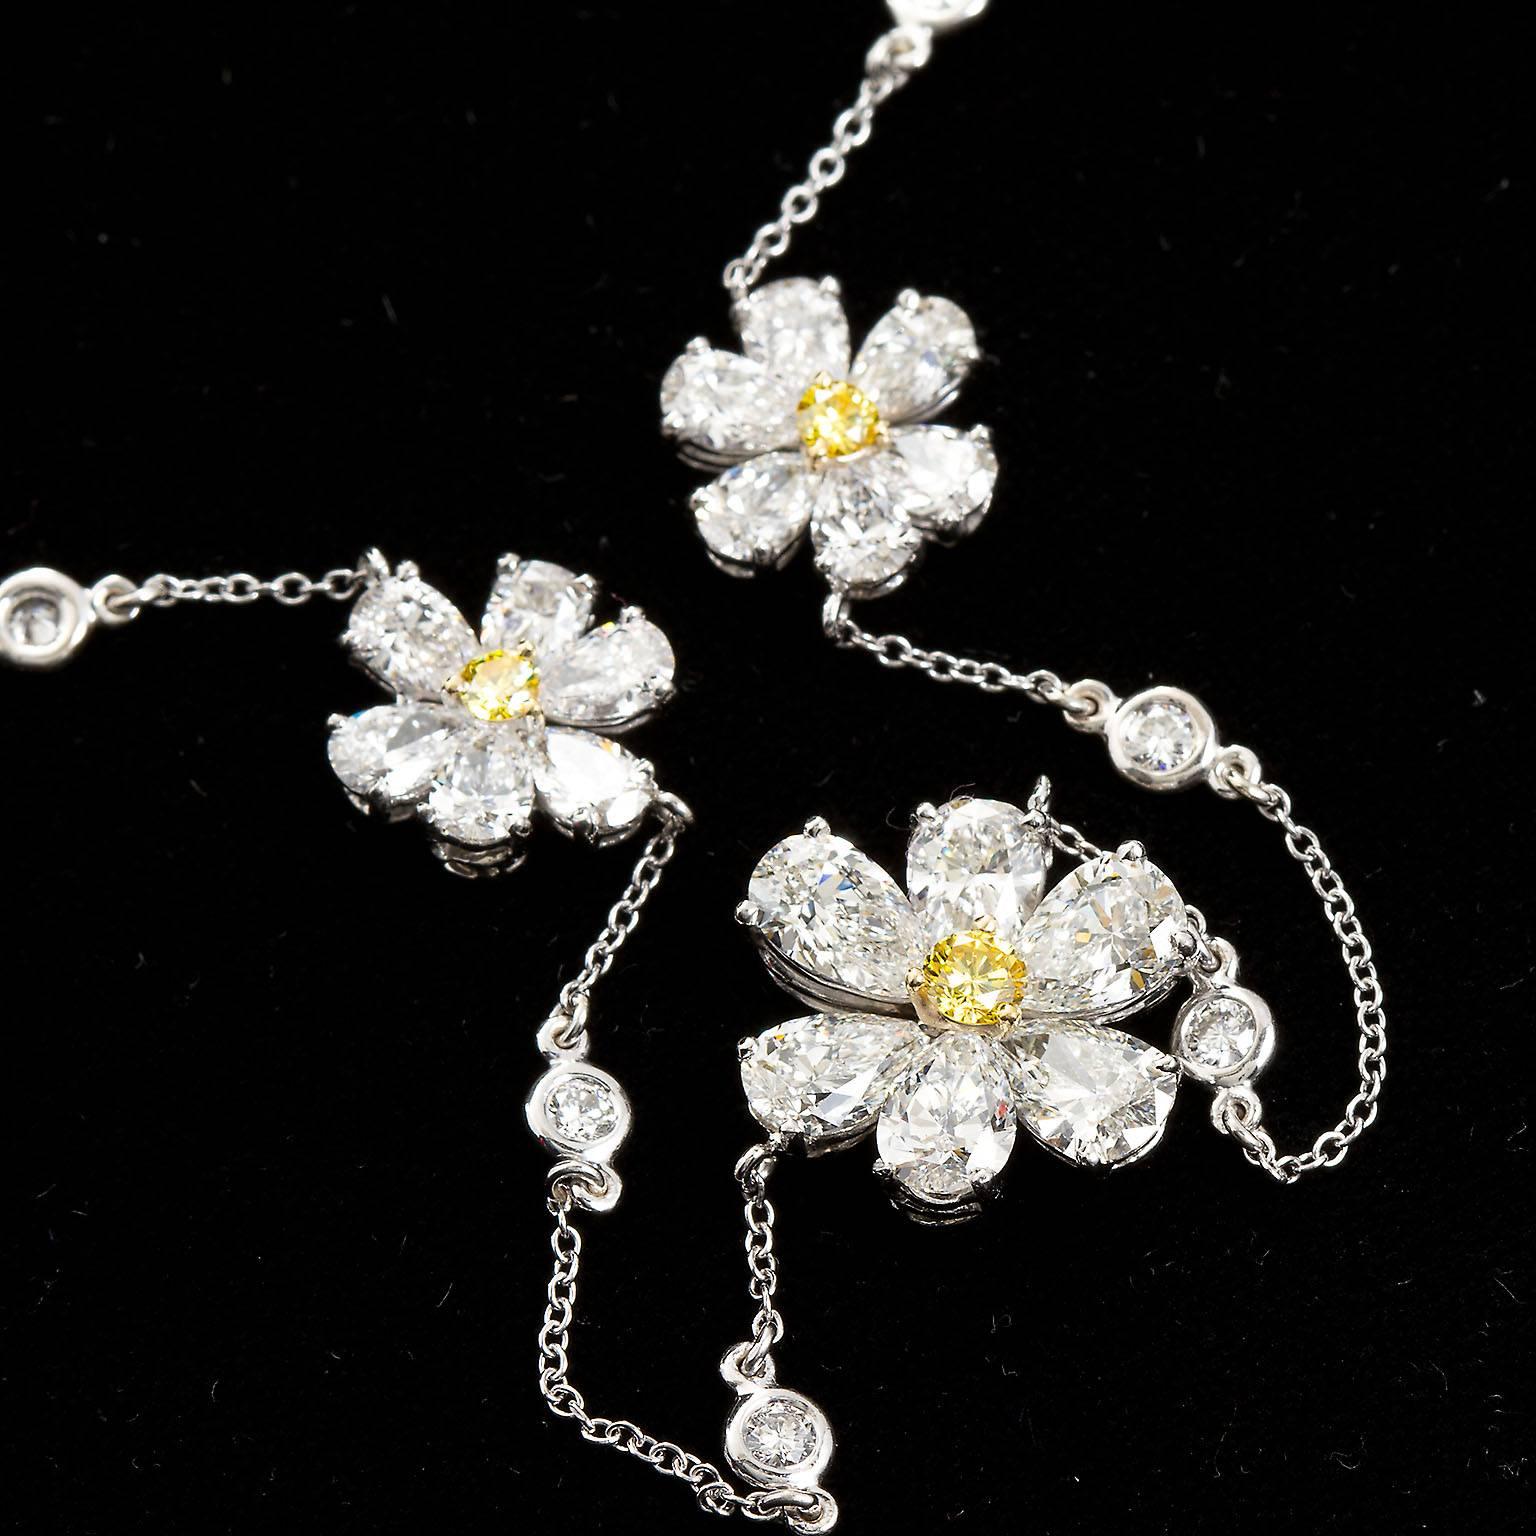 A wonderful diamond pendant necklace with an 18 inch diamond in white gold chain. Center floret contains approx. 3.00 ctw of pear shape diamonds with a center fancy intense yellow round diamond of 0.15 cts. The two smaller florets are each approx.